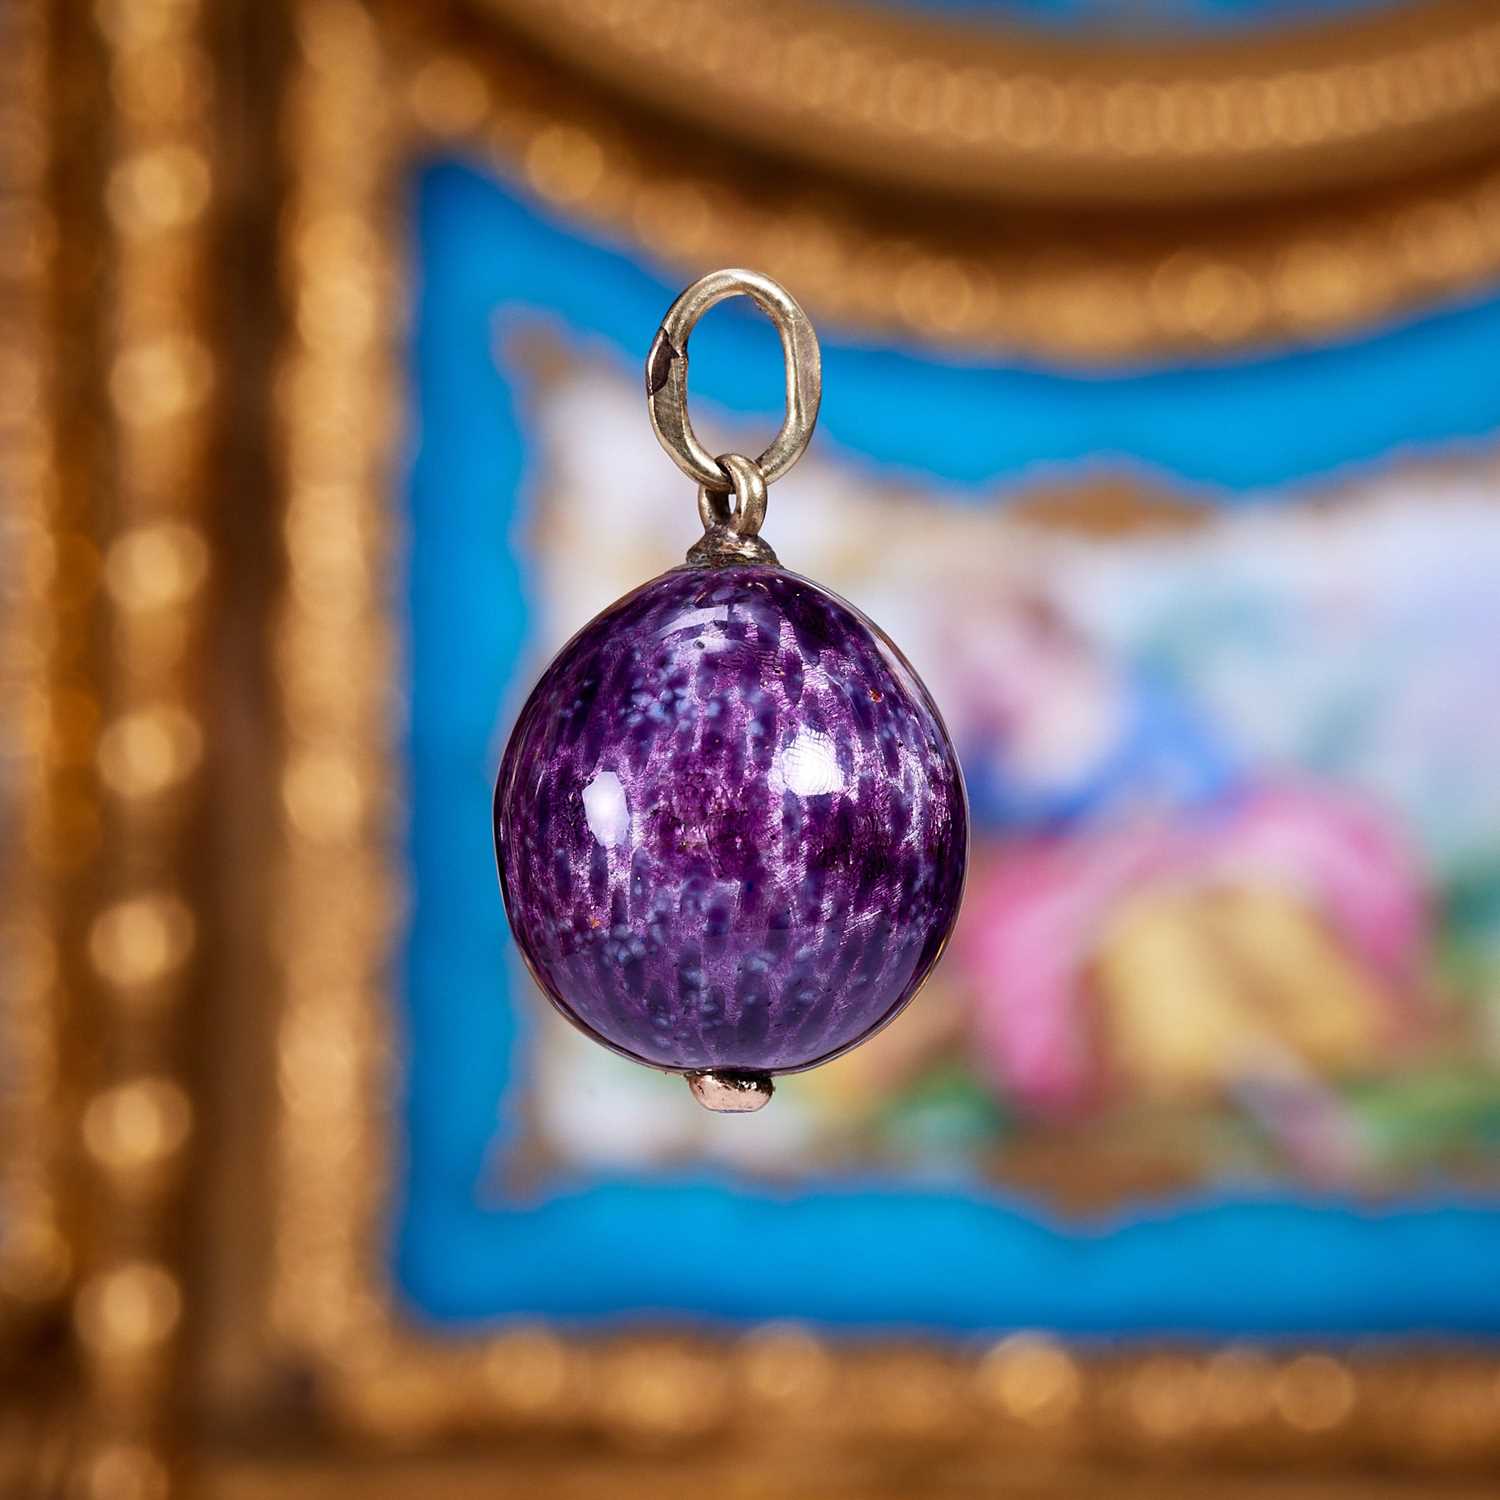 A FABERGE STYLE 14CT GOLD AND ENAMEL EGG PENDANT